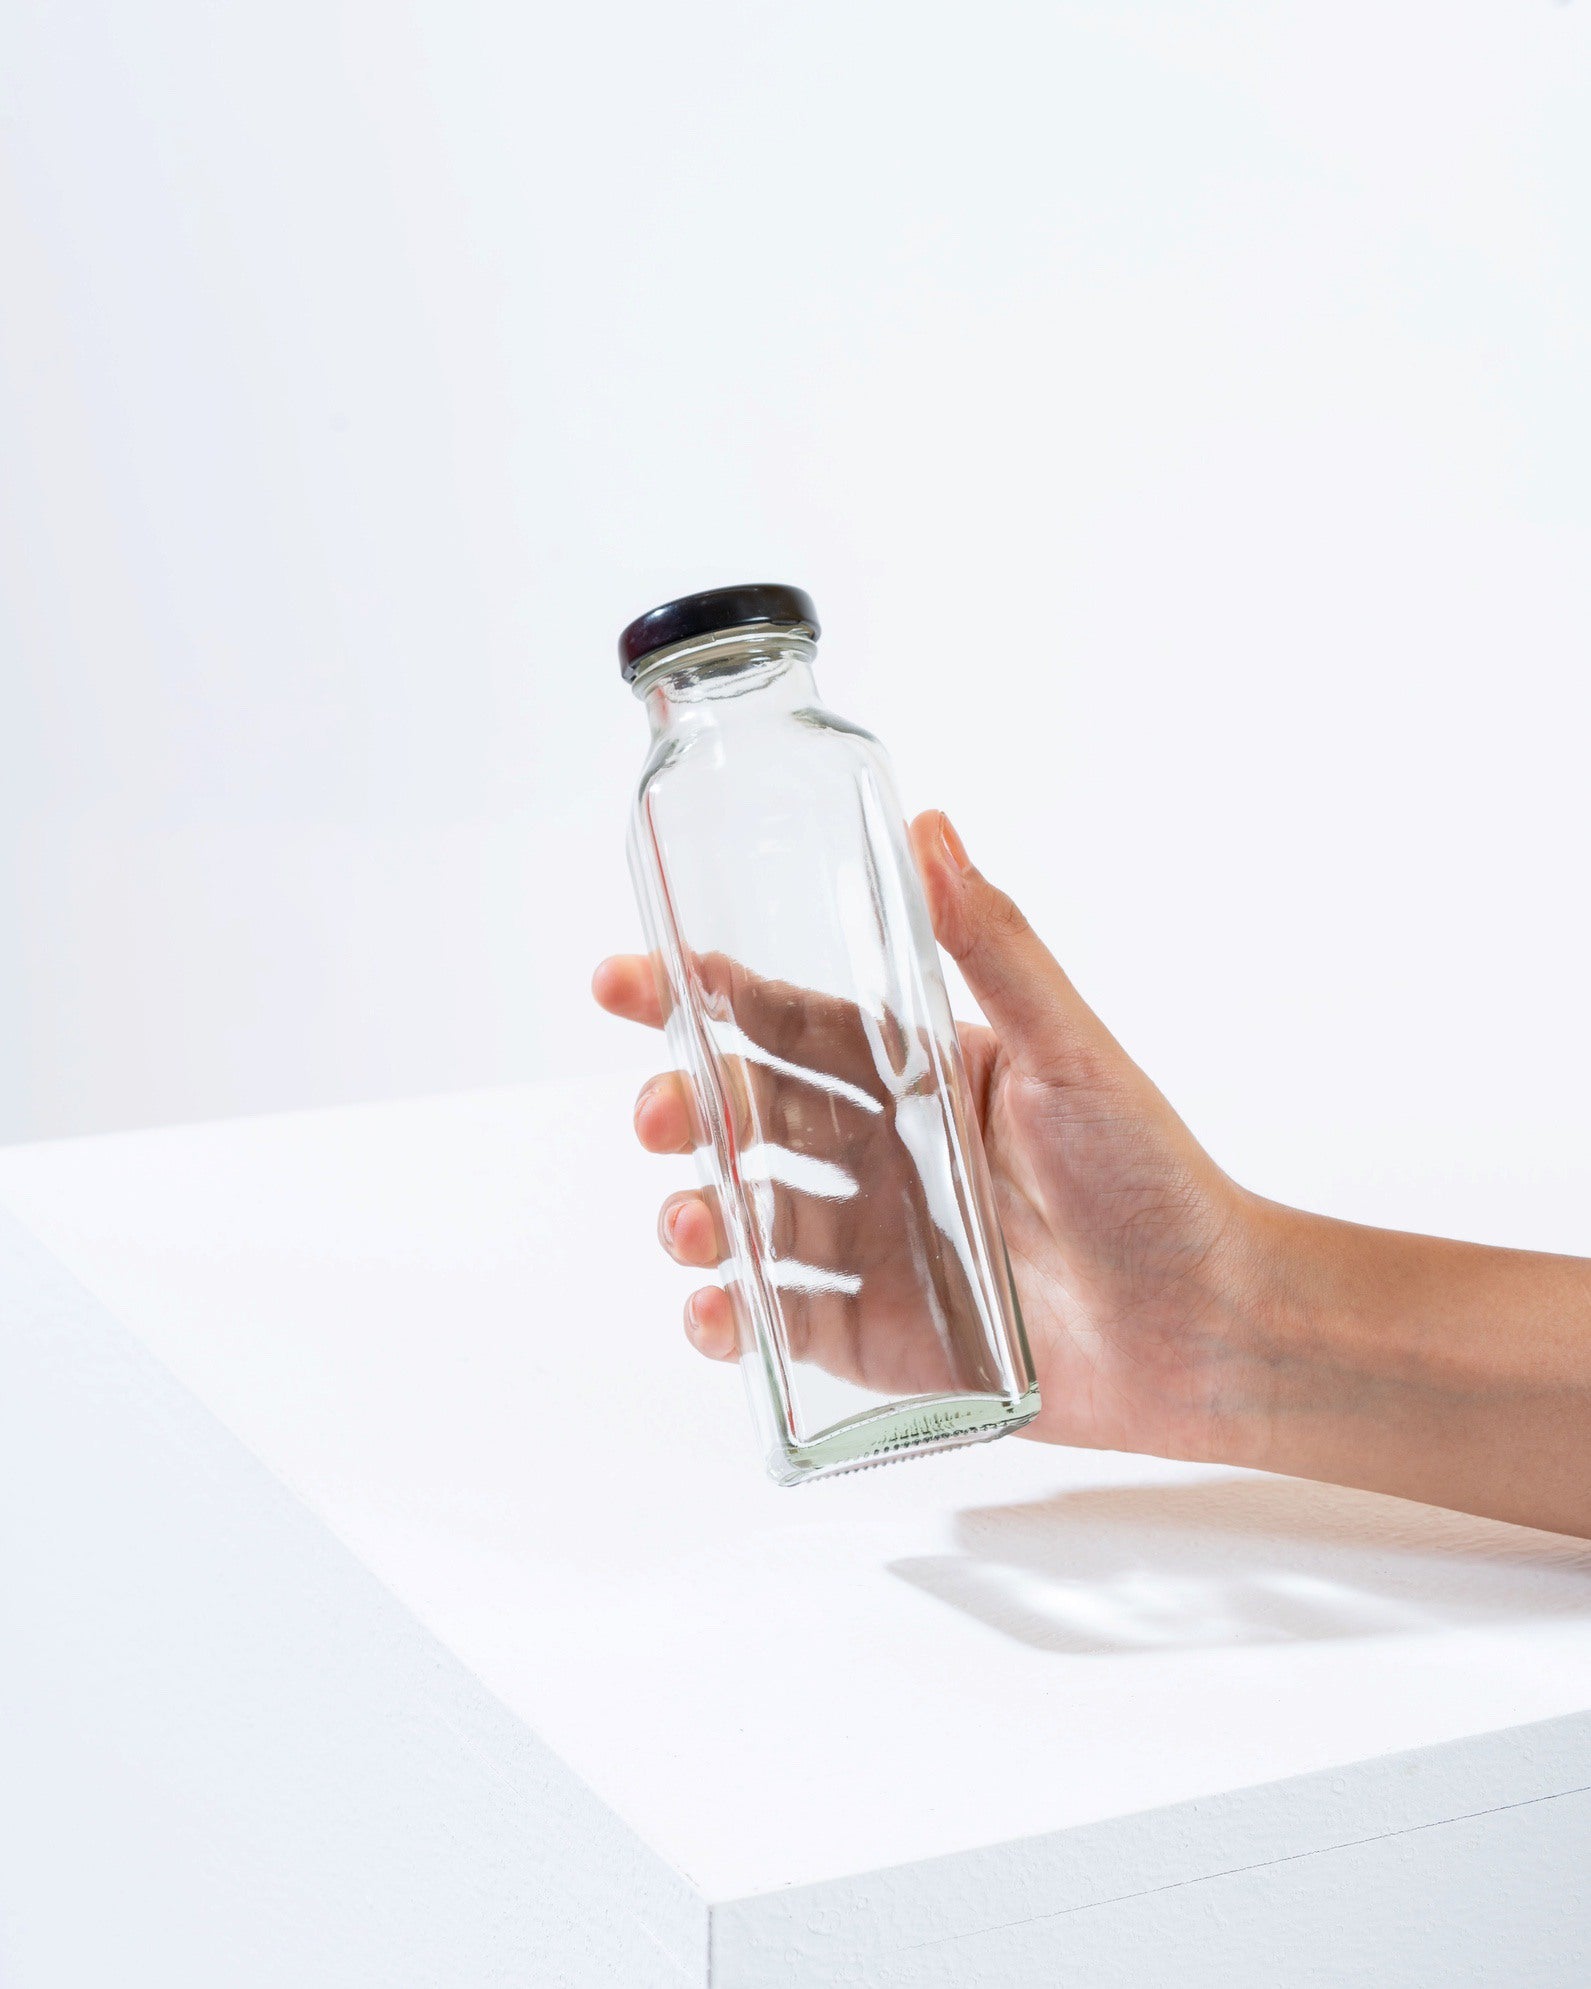 Tall Square bottle - 300ml - Mytype.store